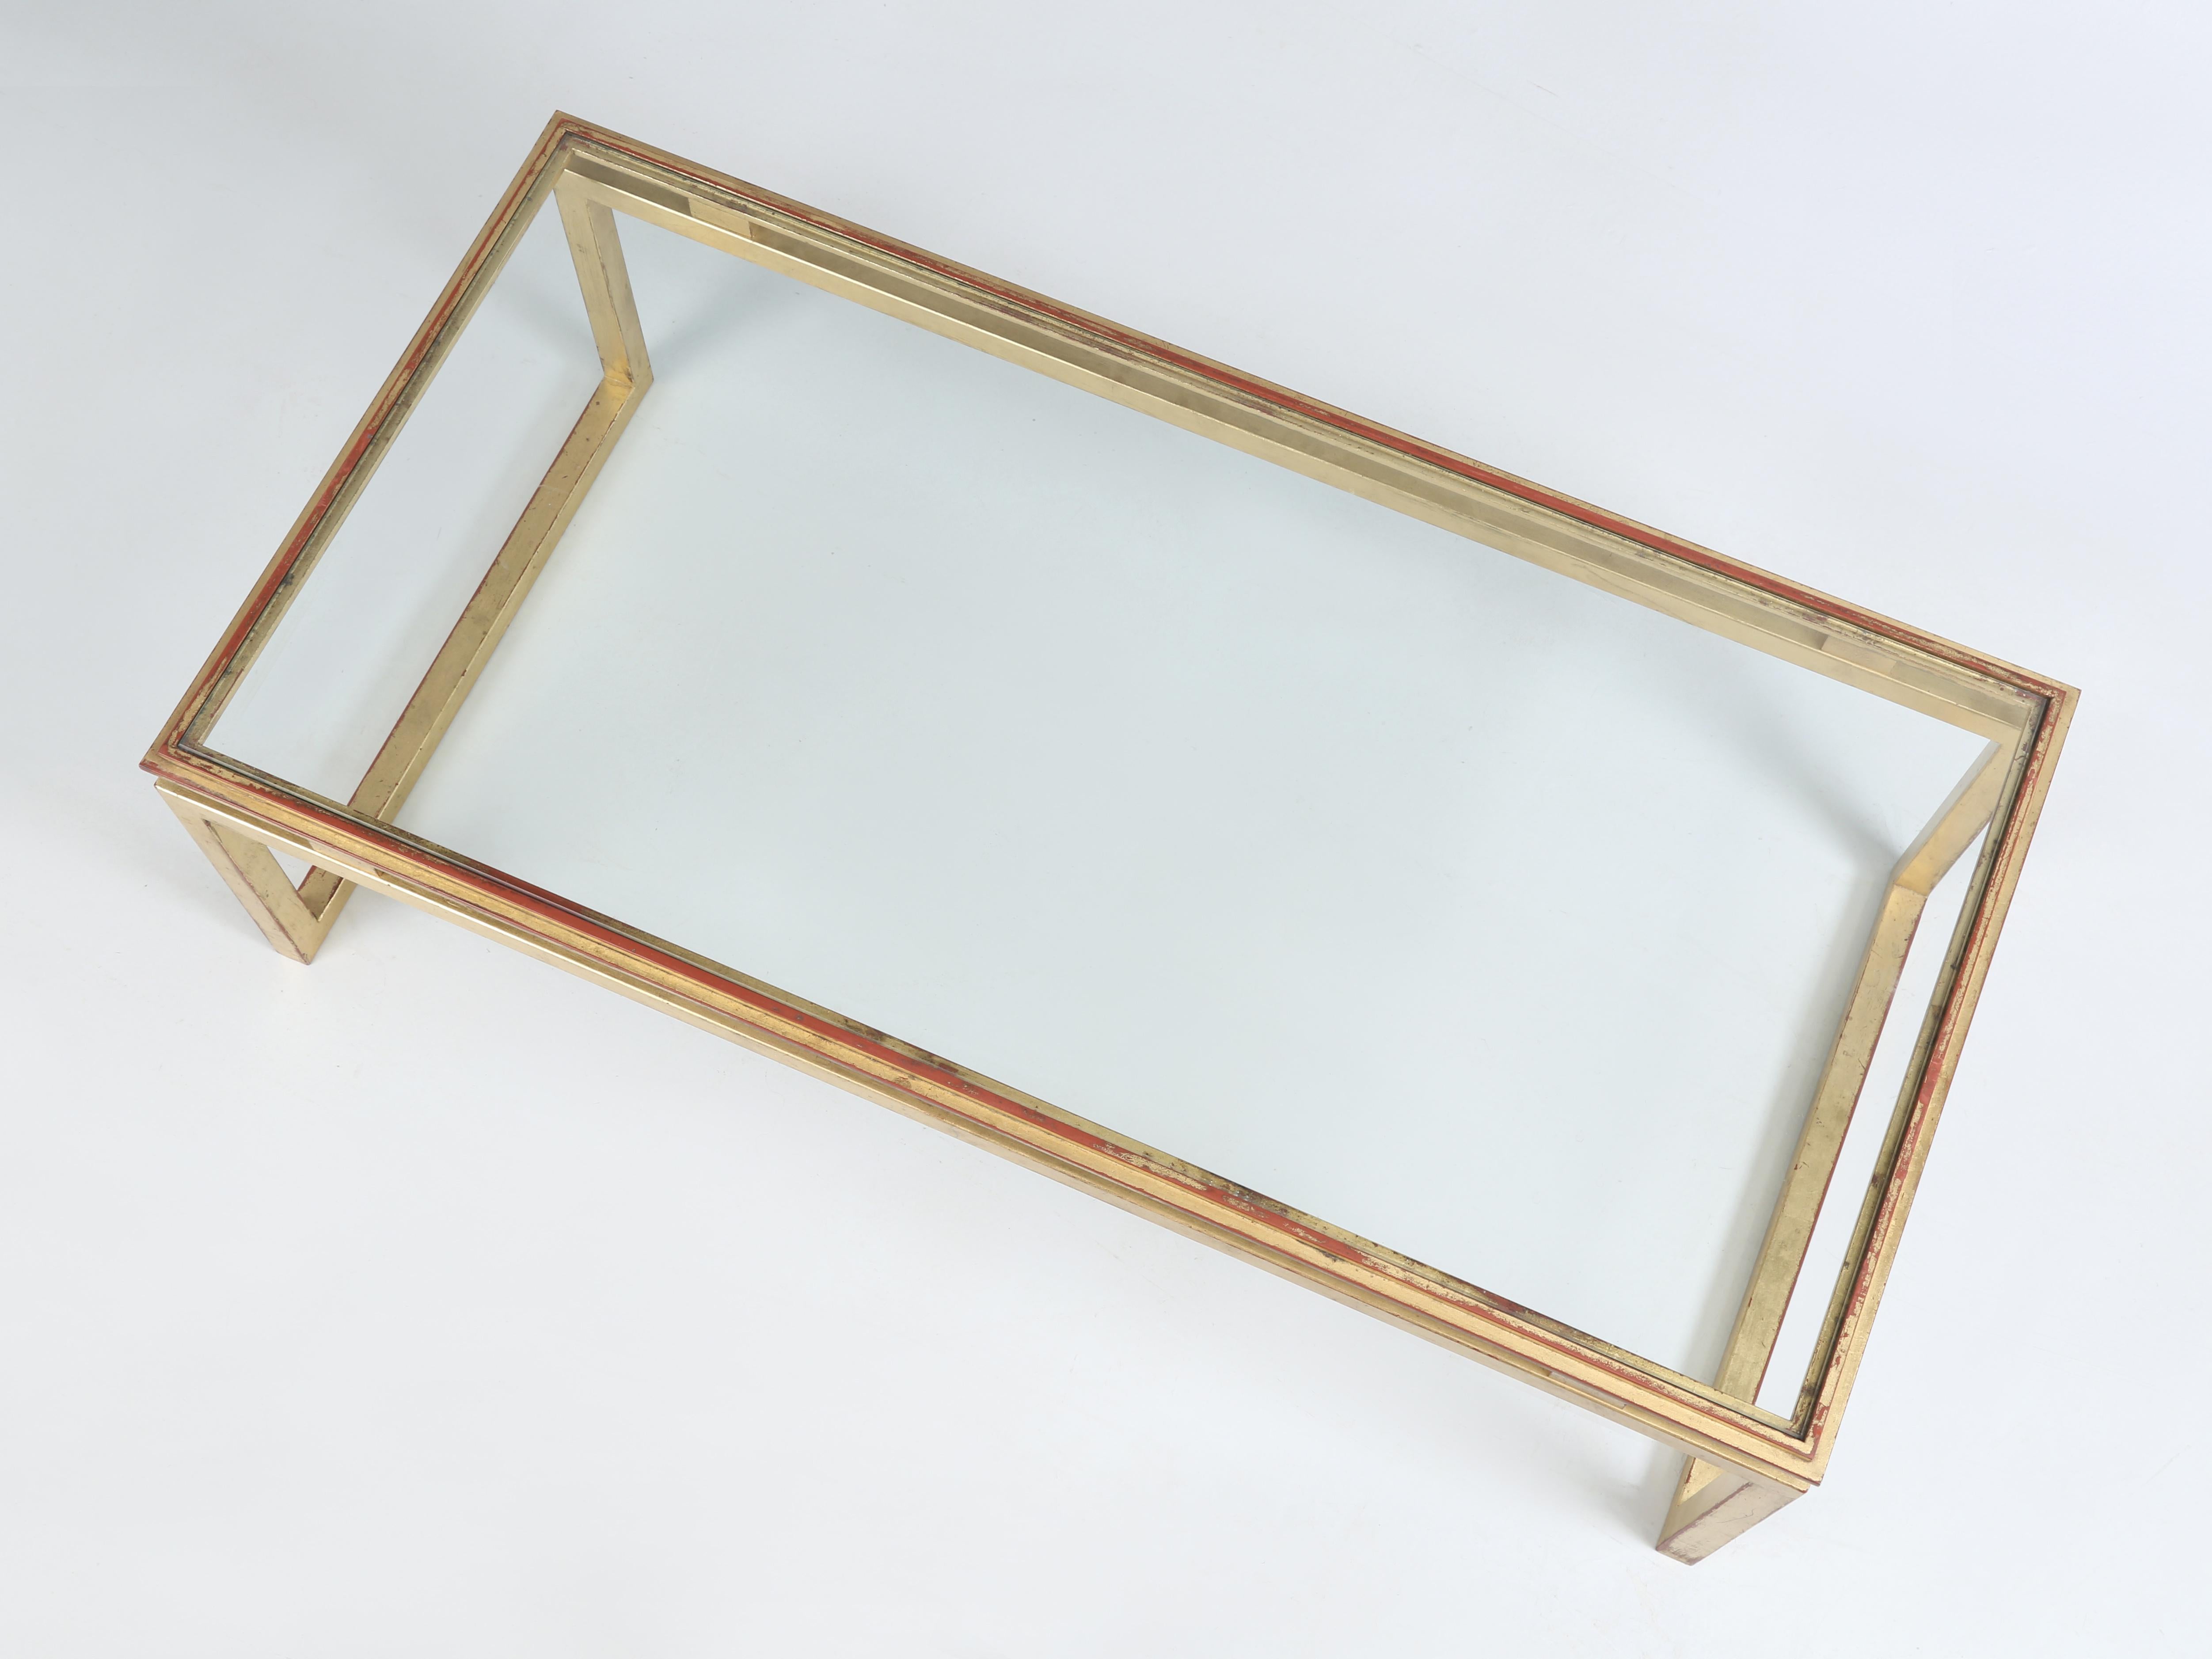 Over the course of the last 30-years we have imported a fair number of 20th century modern gilt metal coffee tables in a similar style, which were attributed to “Maison Ramsay – Paris”. This particular mid-century modern gilt metal and glass coffee